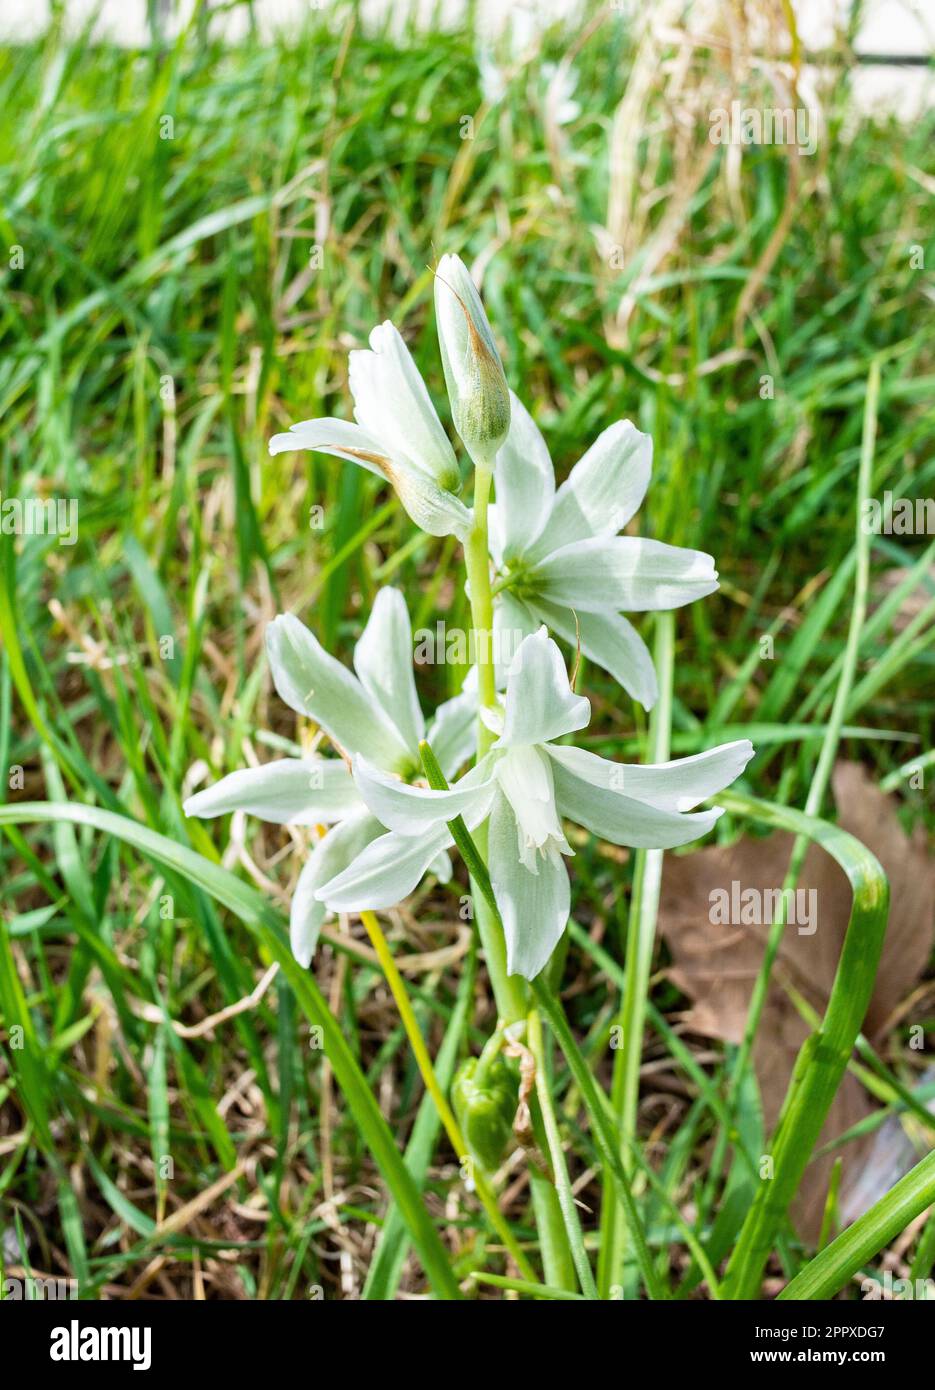 Ornithogalum nutans, known as drooping star-of-Bethlehem,[2] is a species of flowering plant in the family Asparagaceae, native to Europe and South We Stock Photo